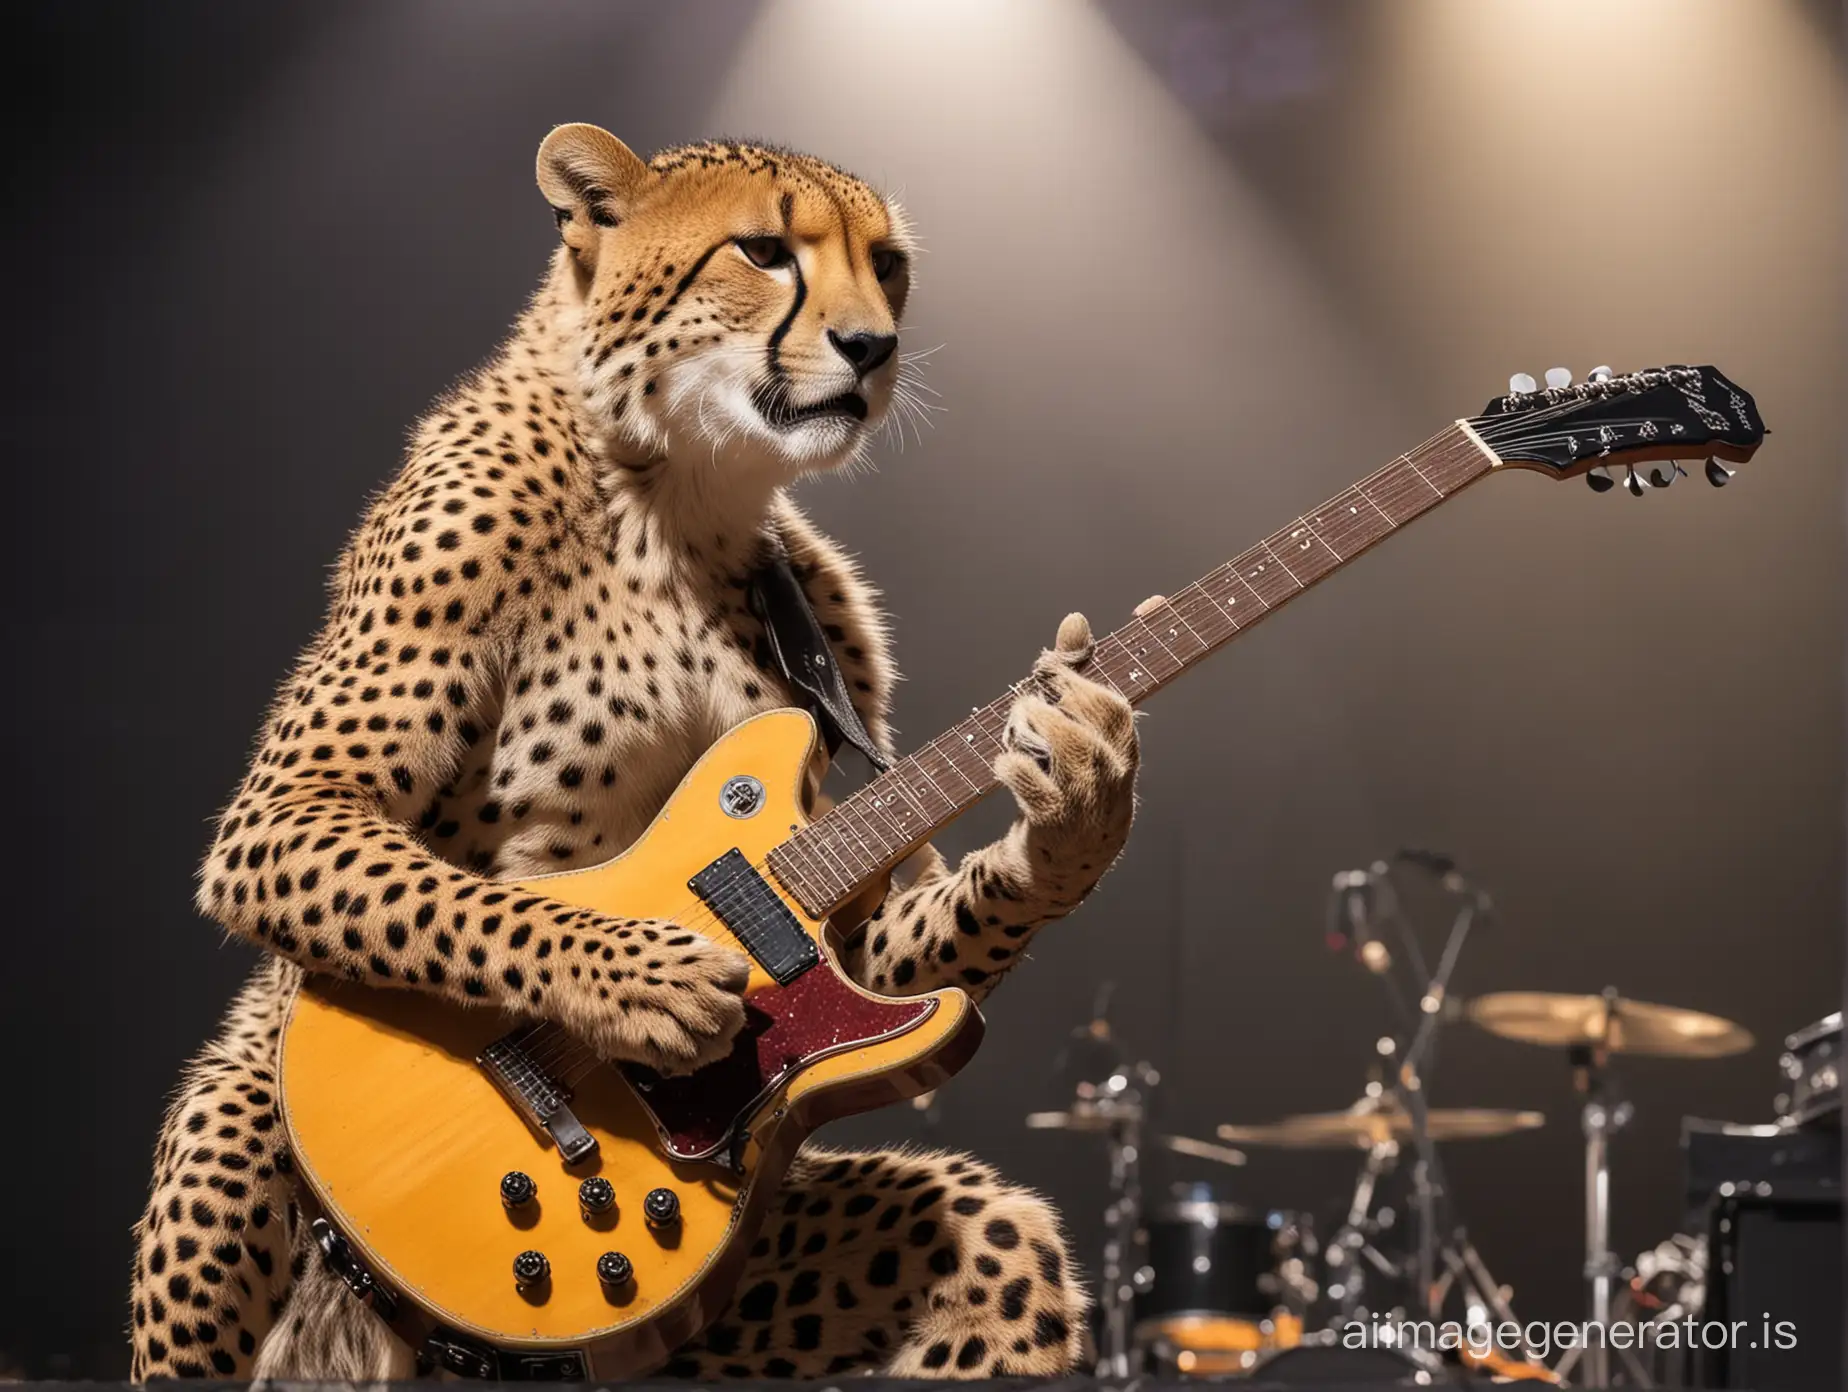 cheetah playing guitar on a stage at a music concert